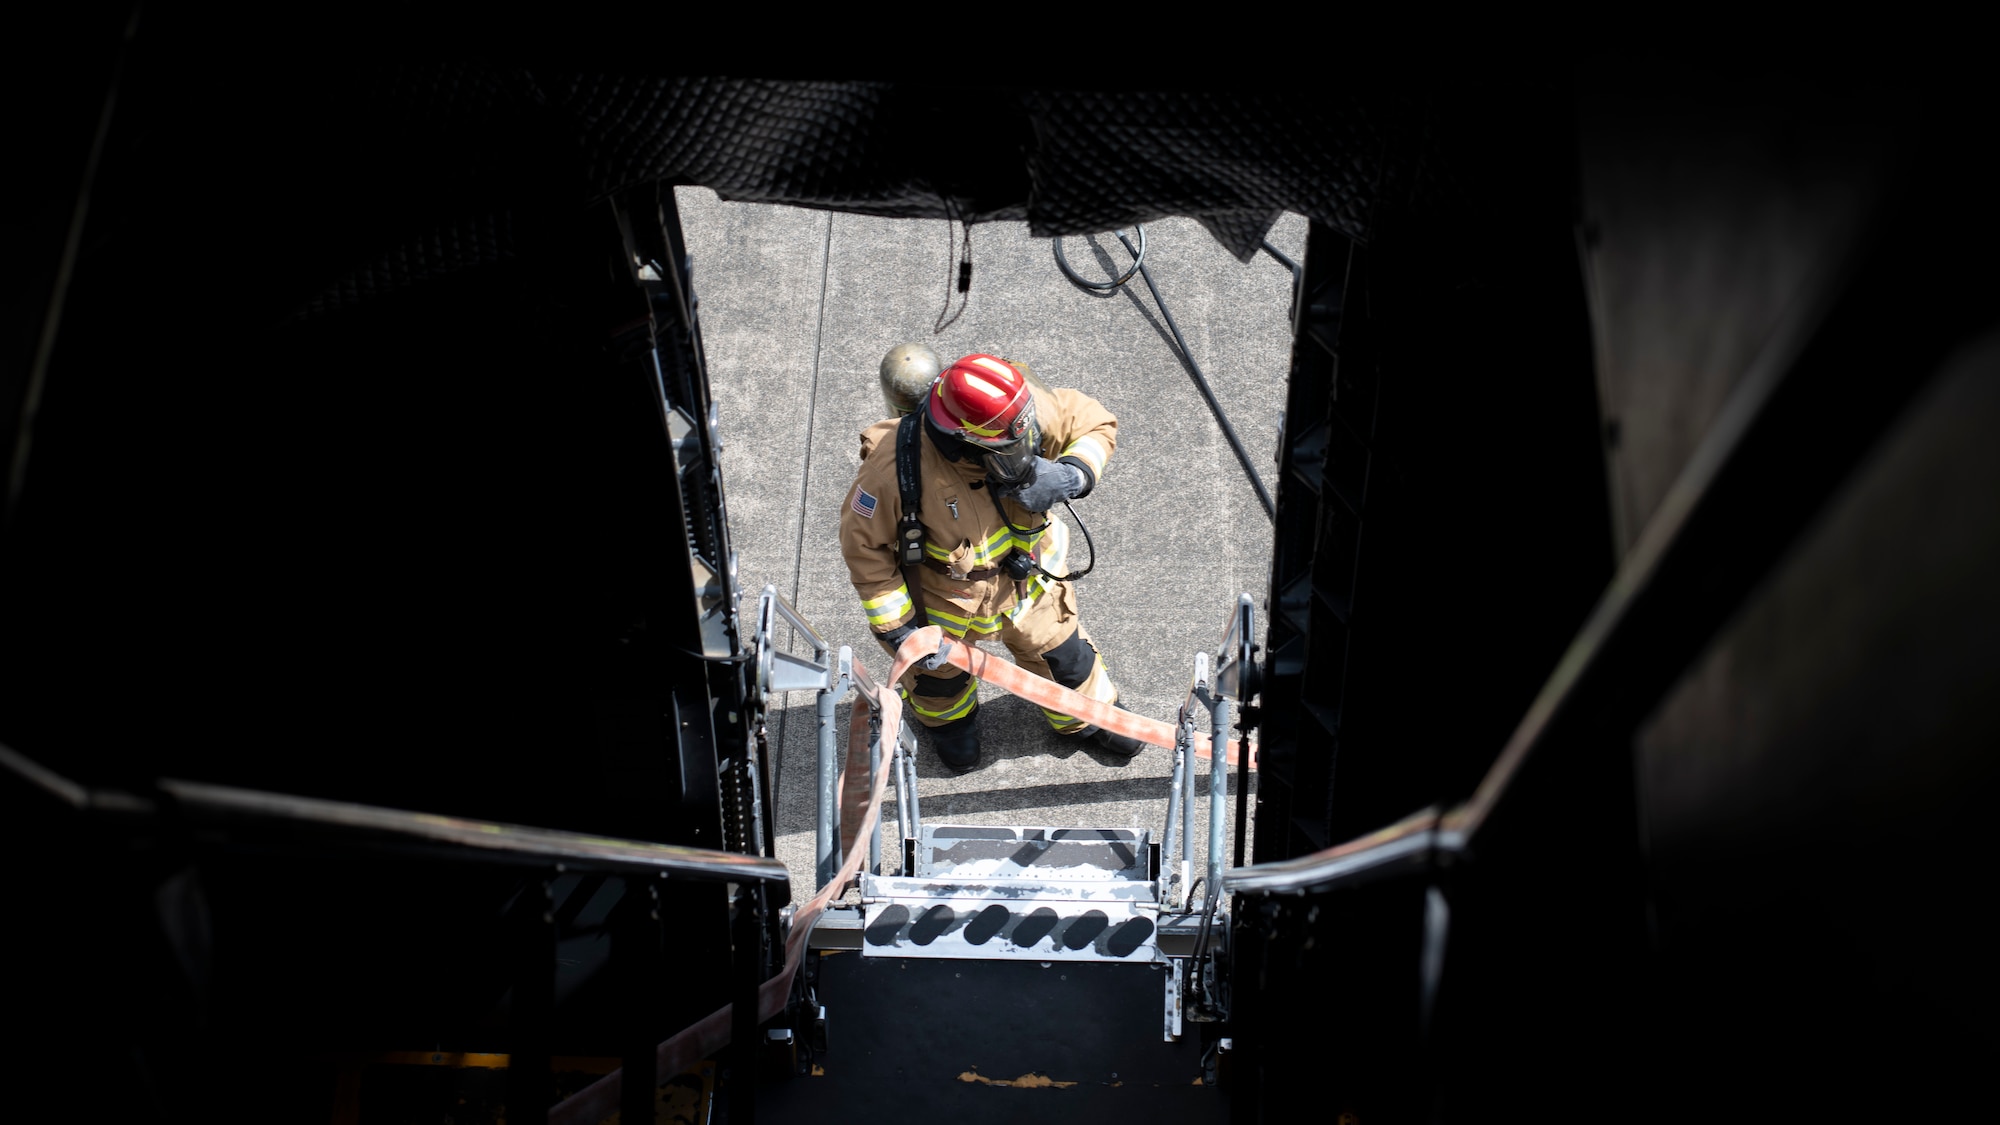 A firefighter carrying a fire hose is framed in the dark entry hatch of a very large cargo plane